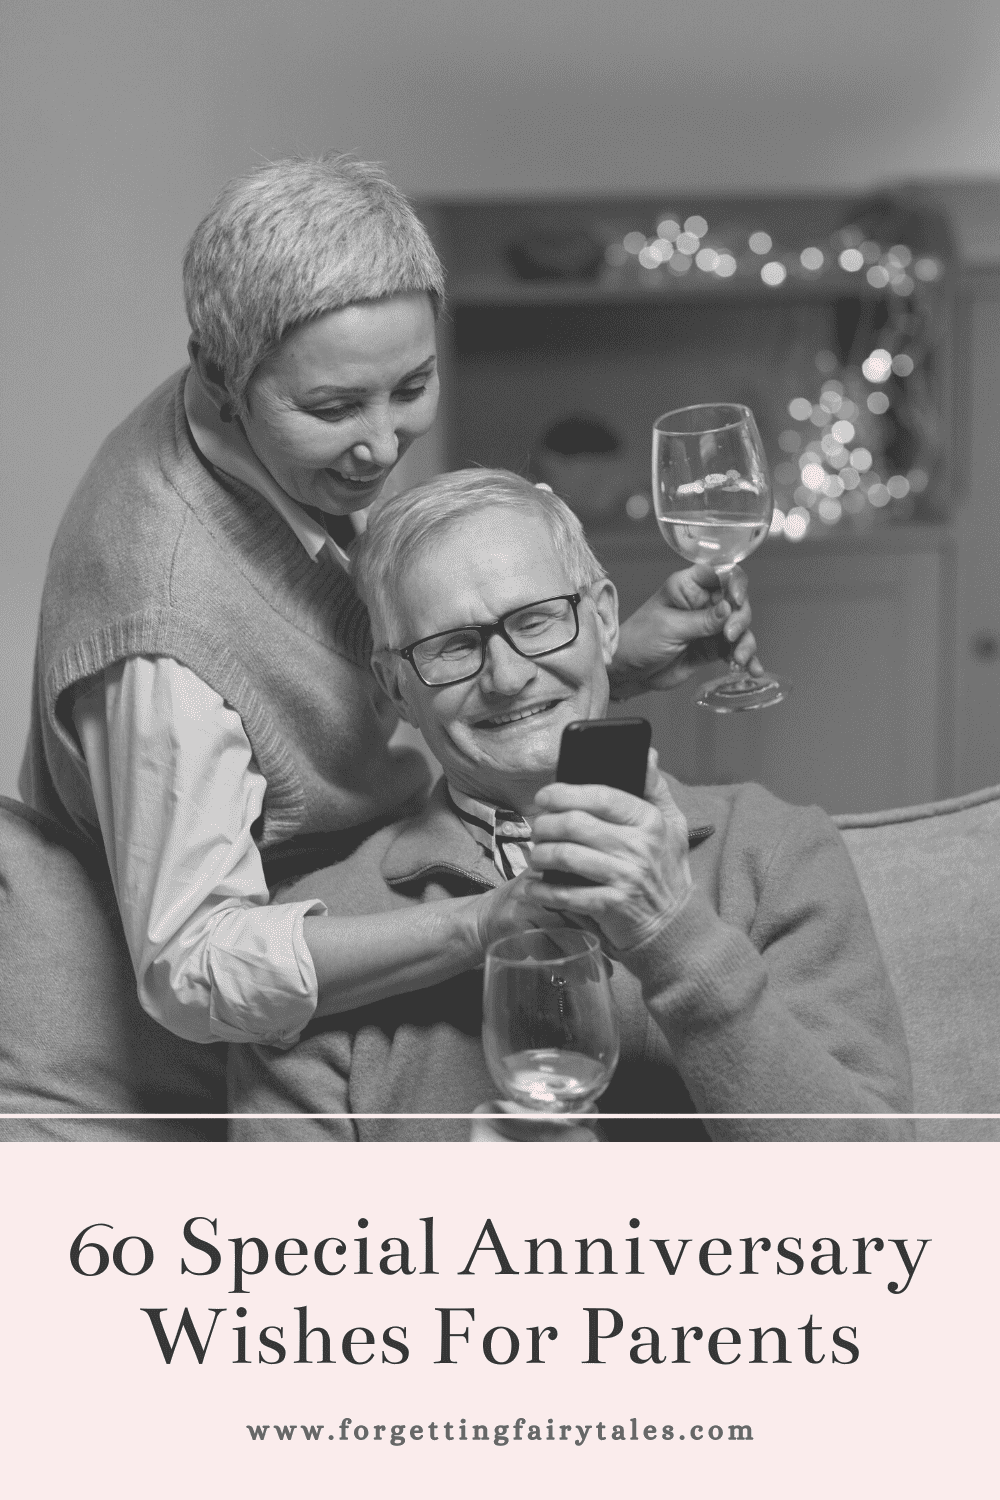 60 Special Anniversary Wishes For Parents [Ready-Made Templates]